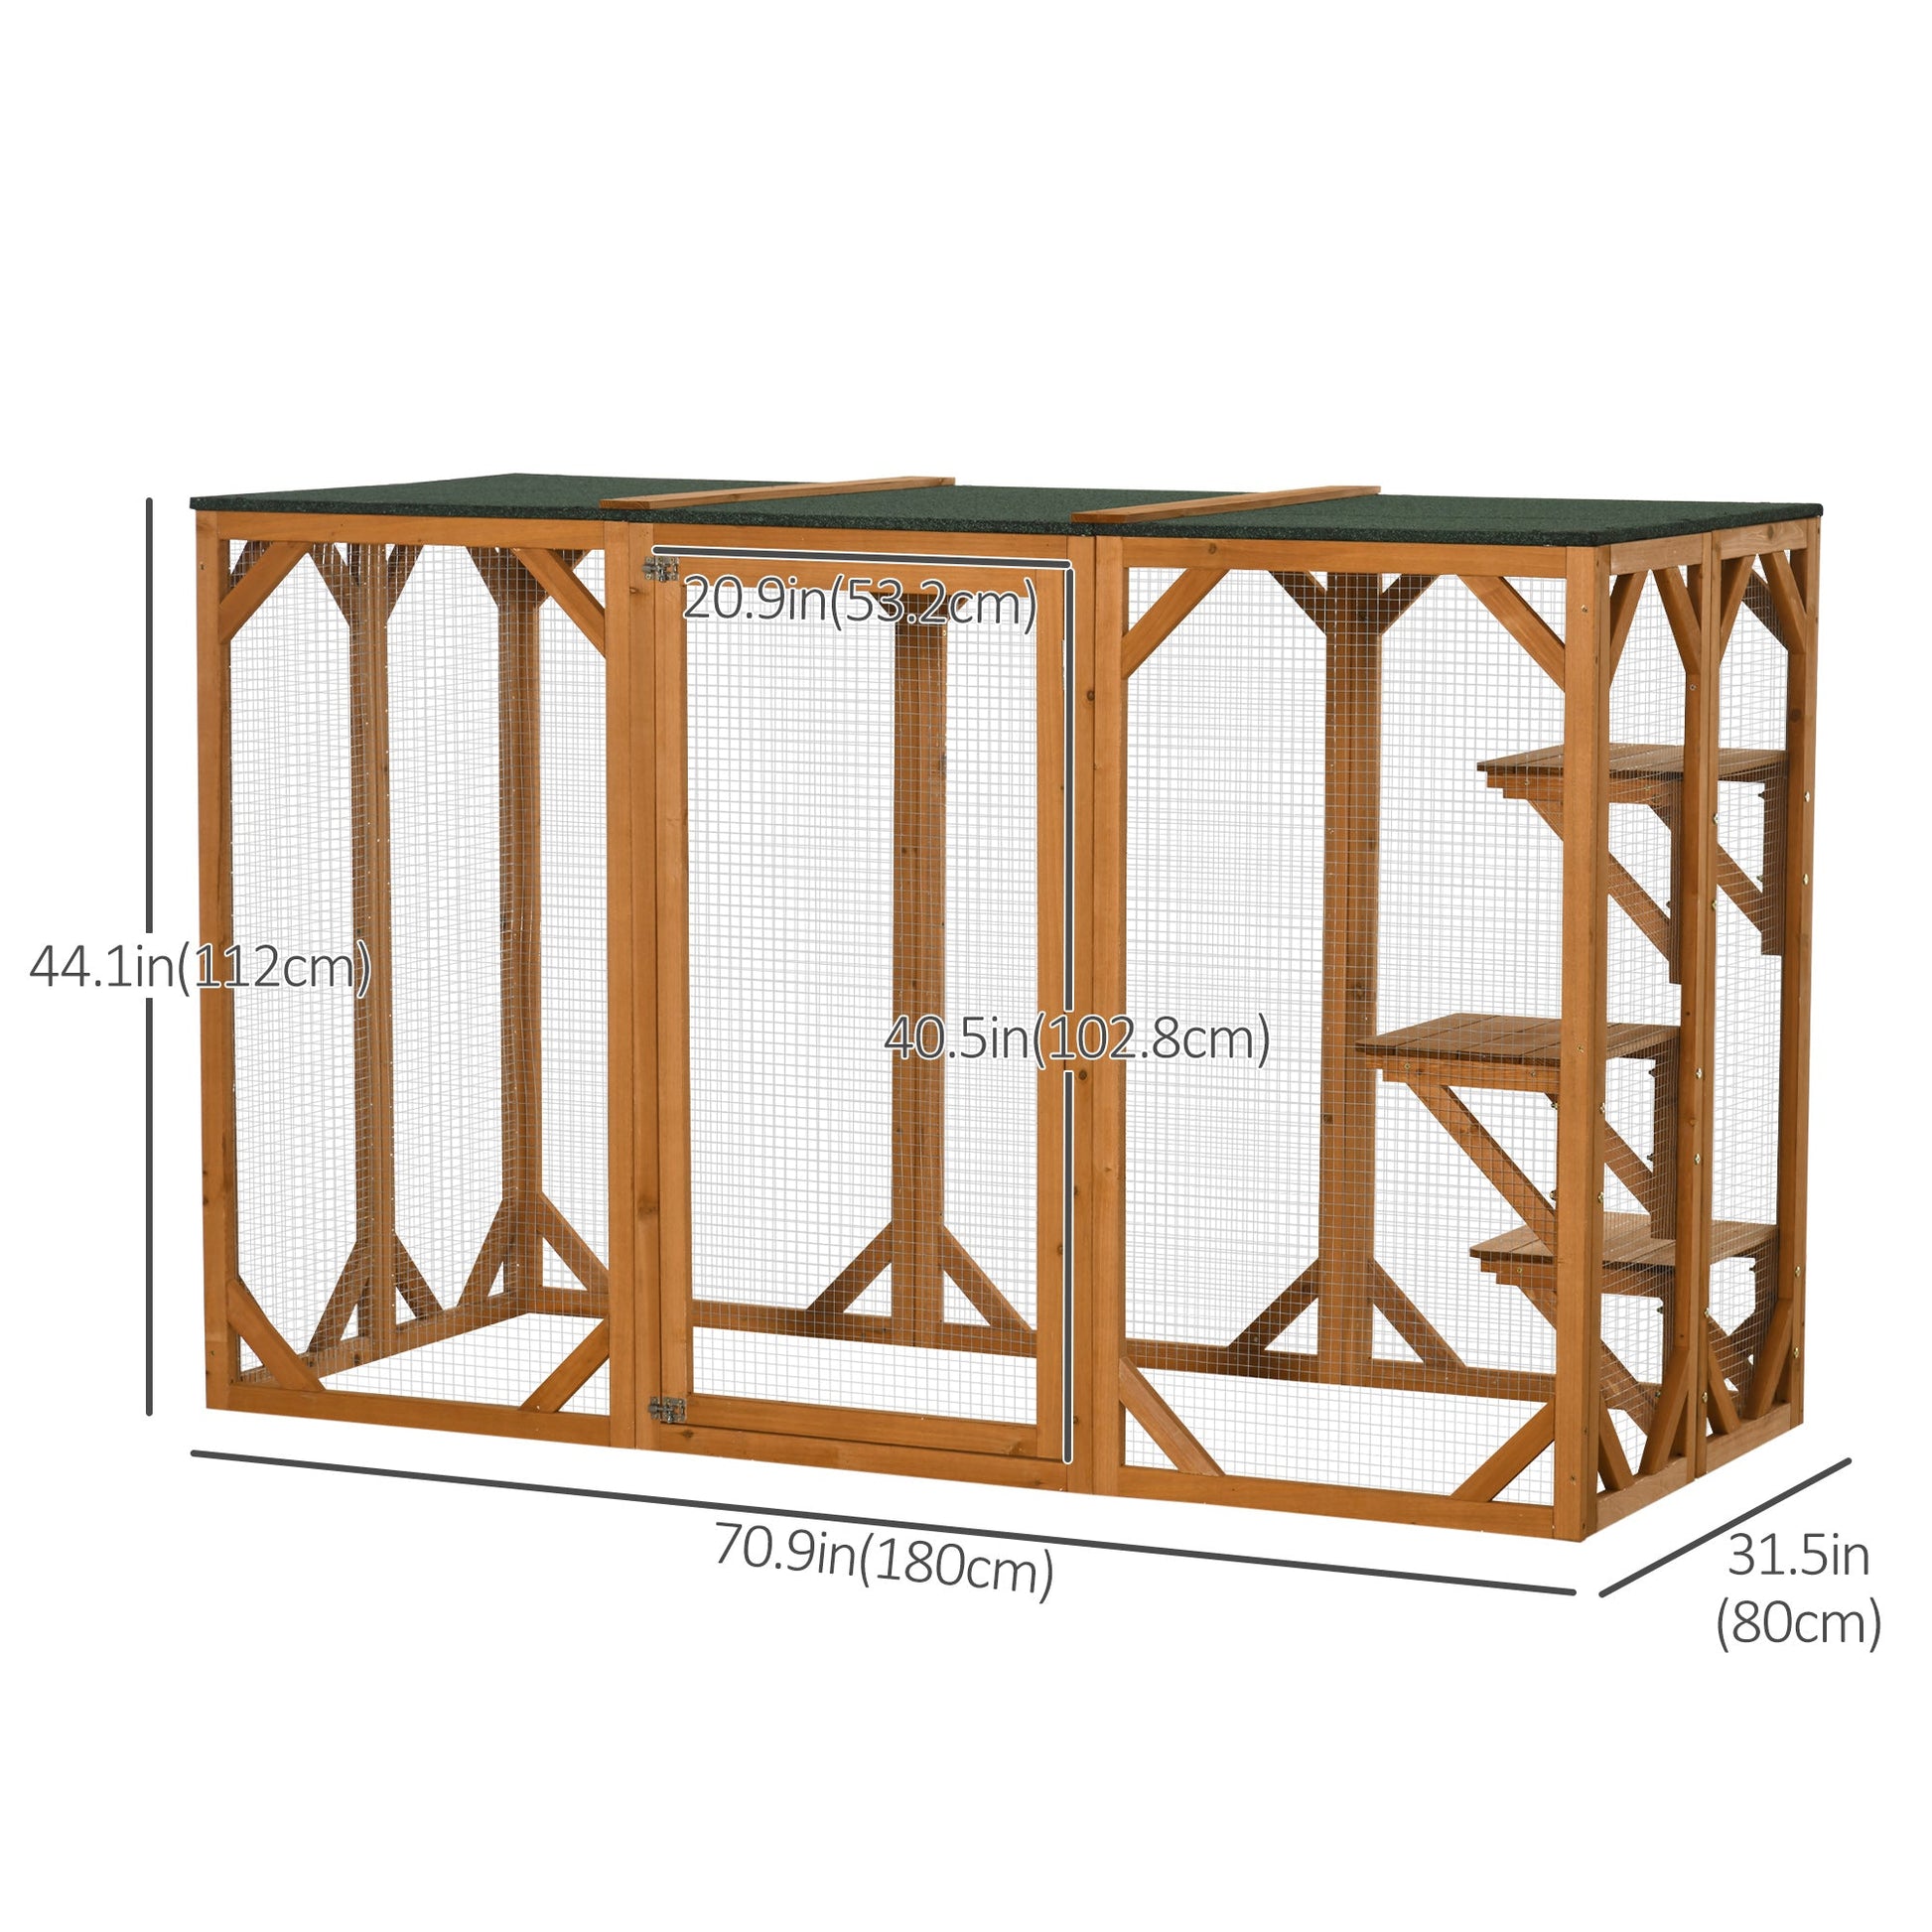 Cat Cage Indoor Catio Outdoor Cat Enclosure Pet House Small Animal Hutch for Rabbit, Kitten, Crate Kennel with Waterproof Roof, Multi-Level Platforms, Lock, Orange at Gallery Canada